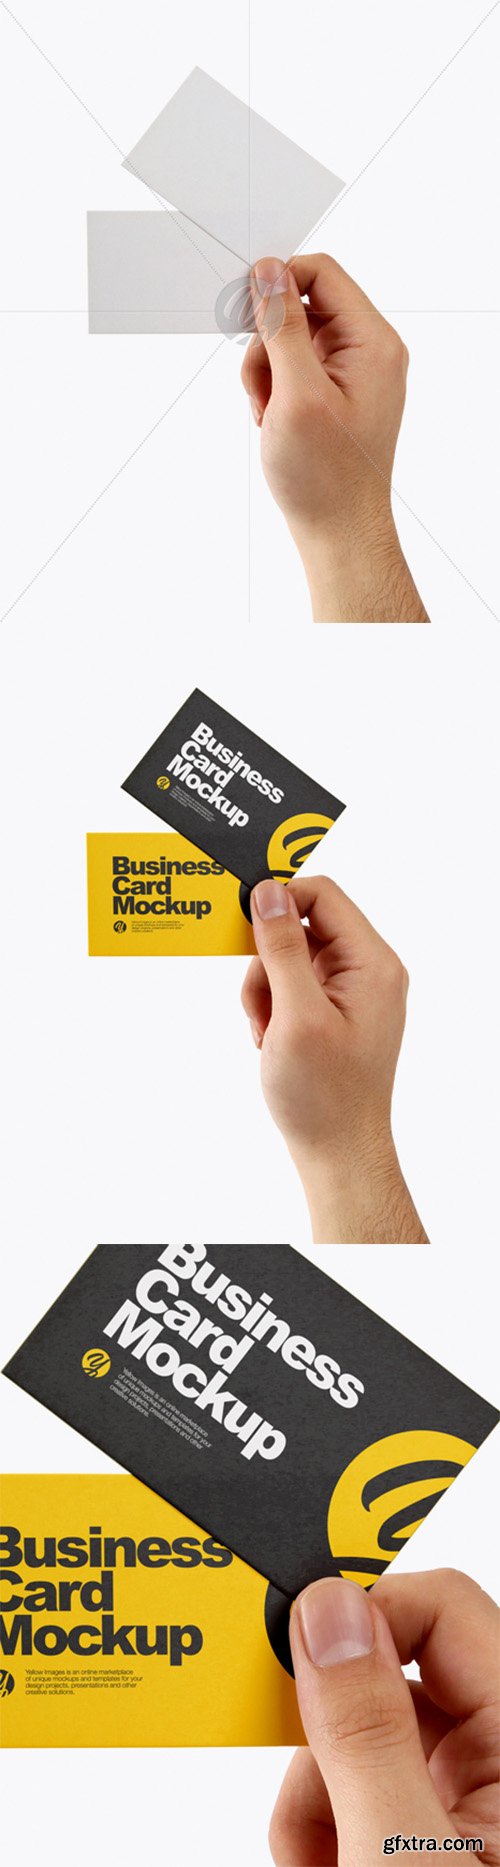 Business Cards in a Hand Mockup 24909